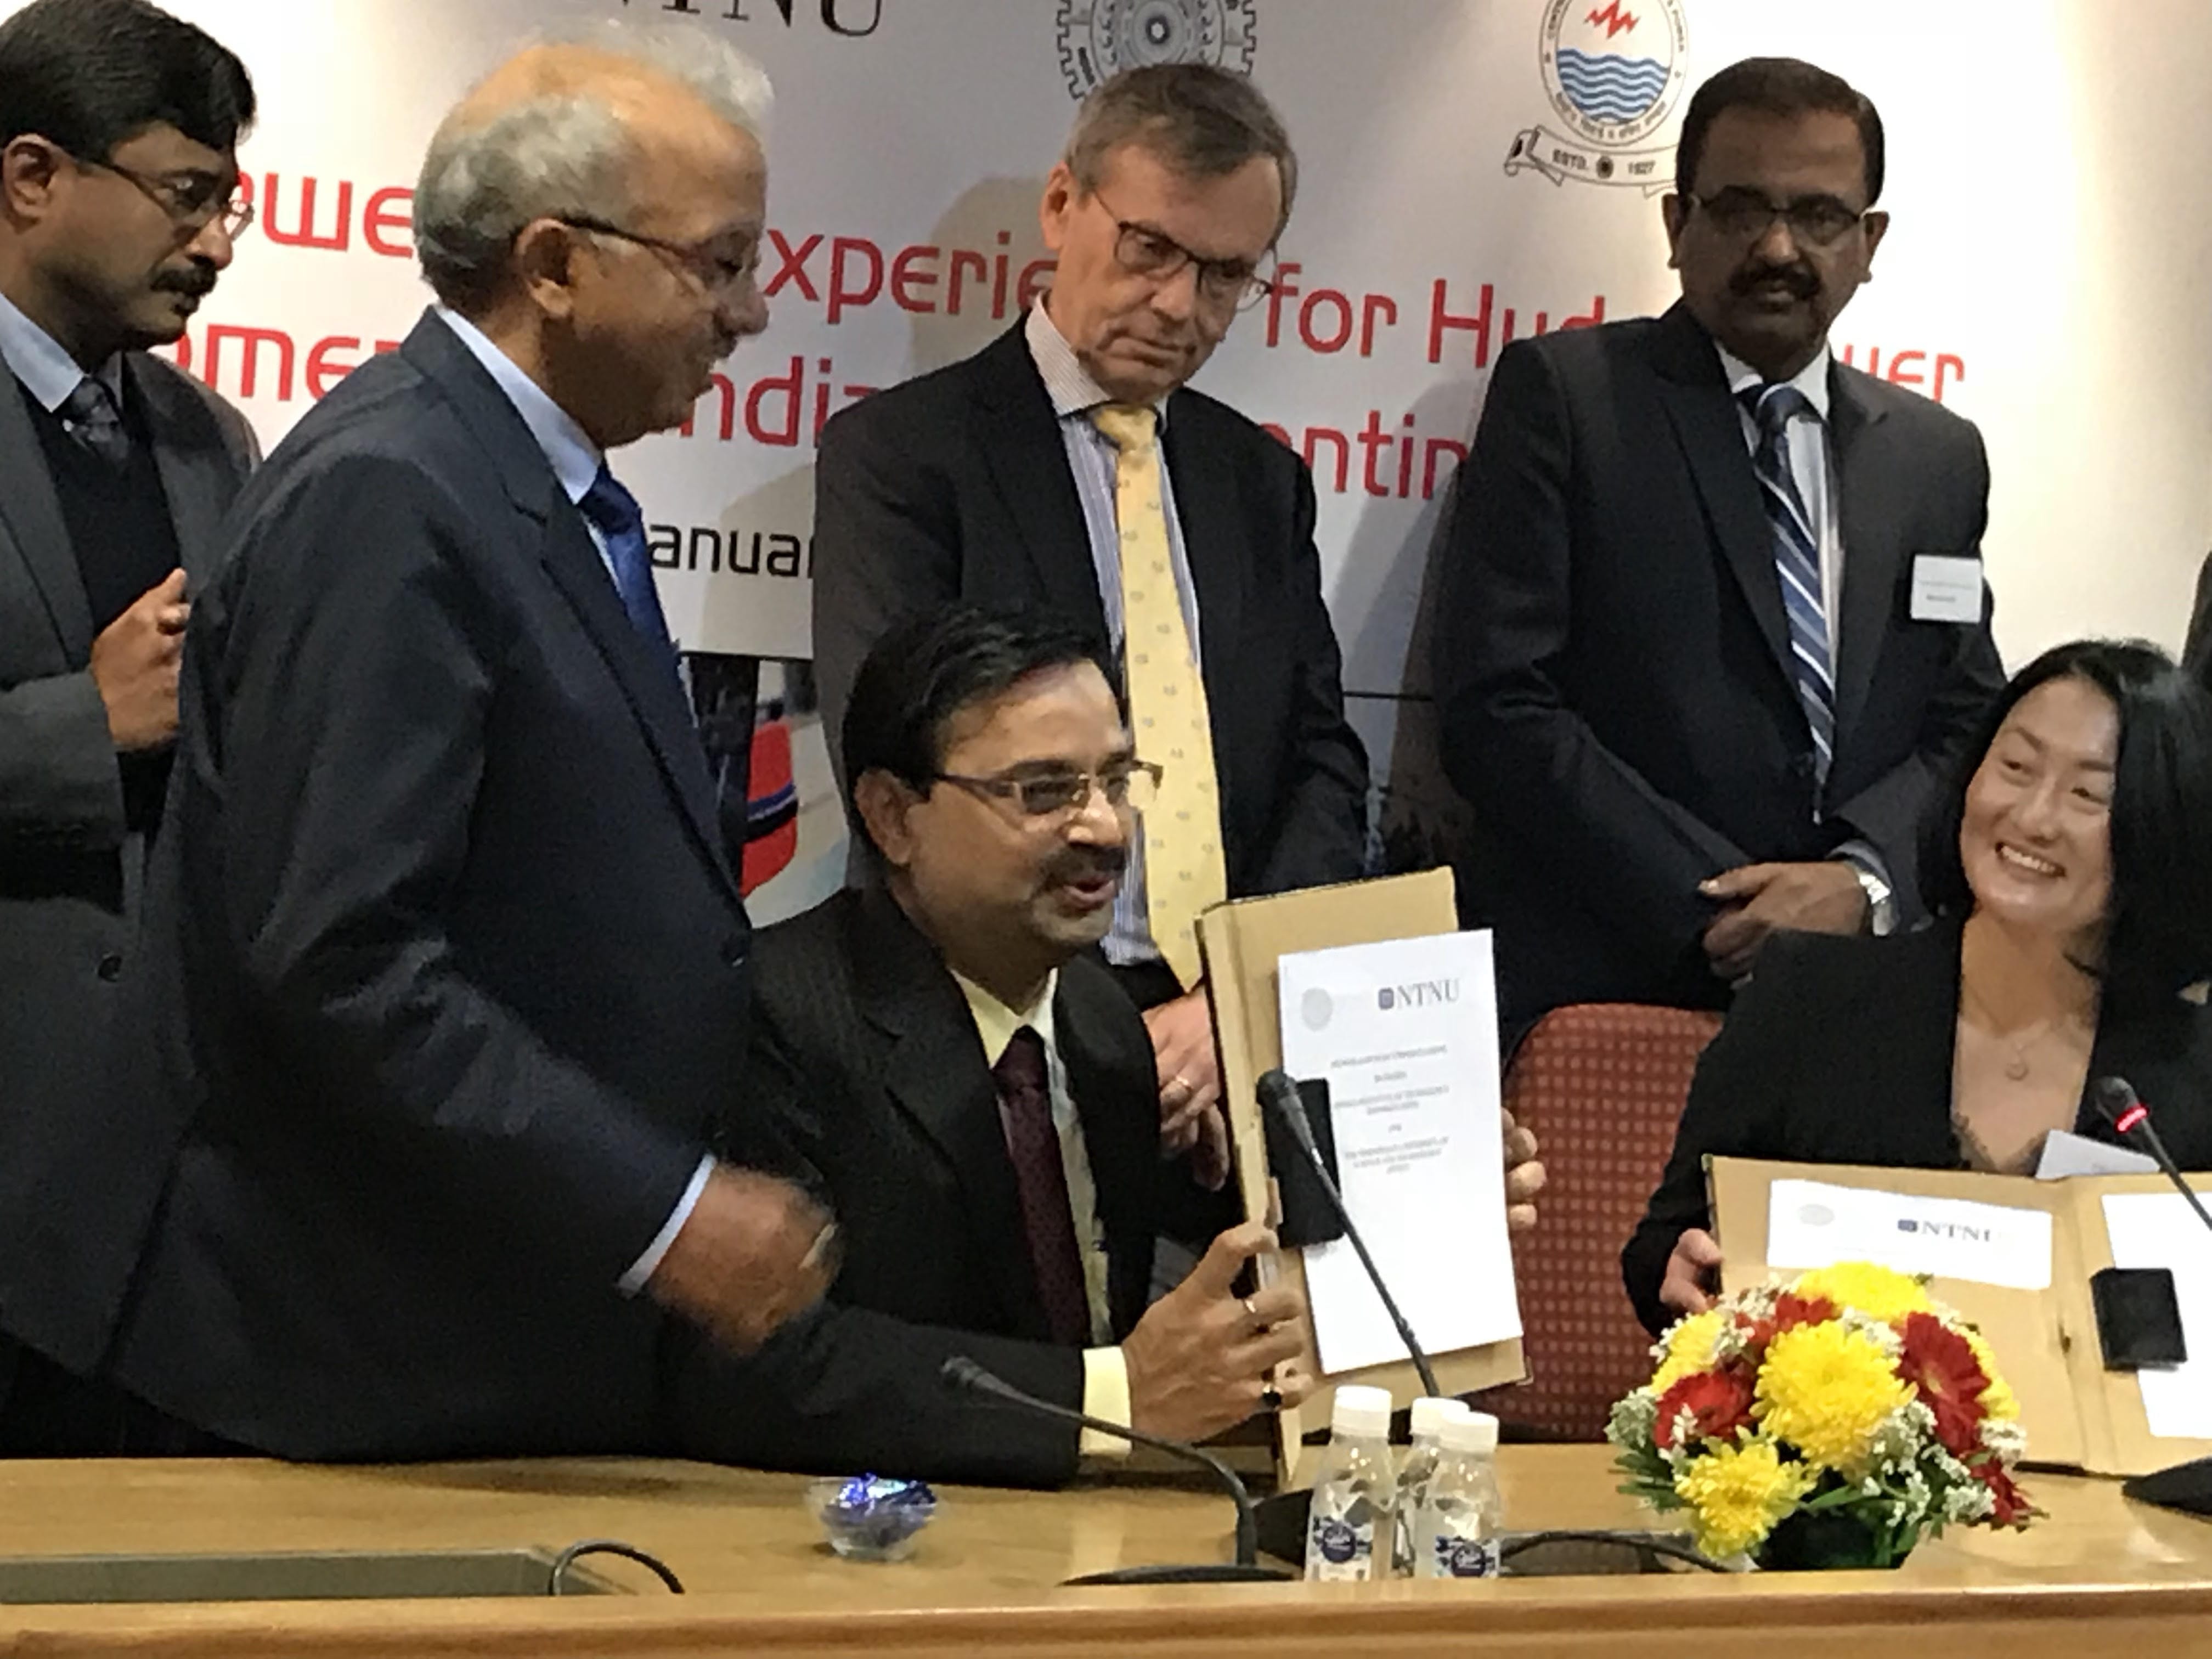 IIT Roorkee exchanged MOU with Norwegian University of Science and Technology (NTNU) of Norway for research and education.